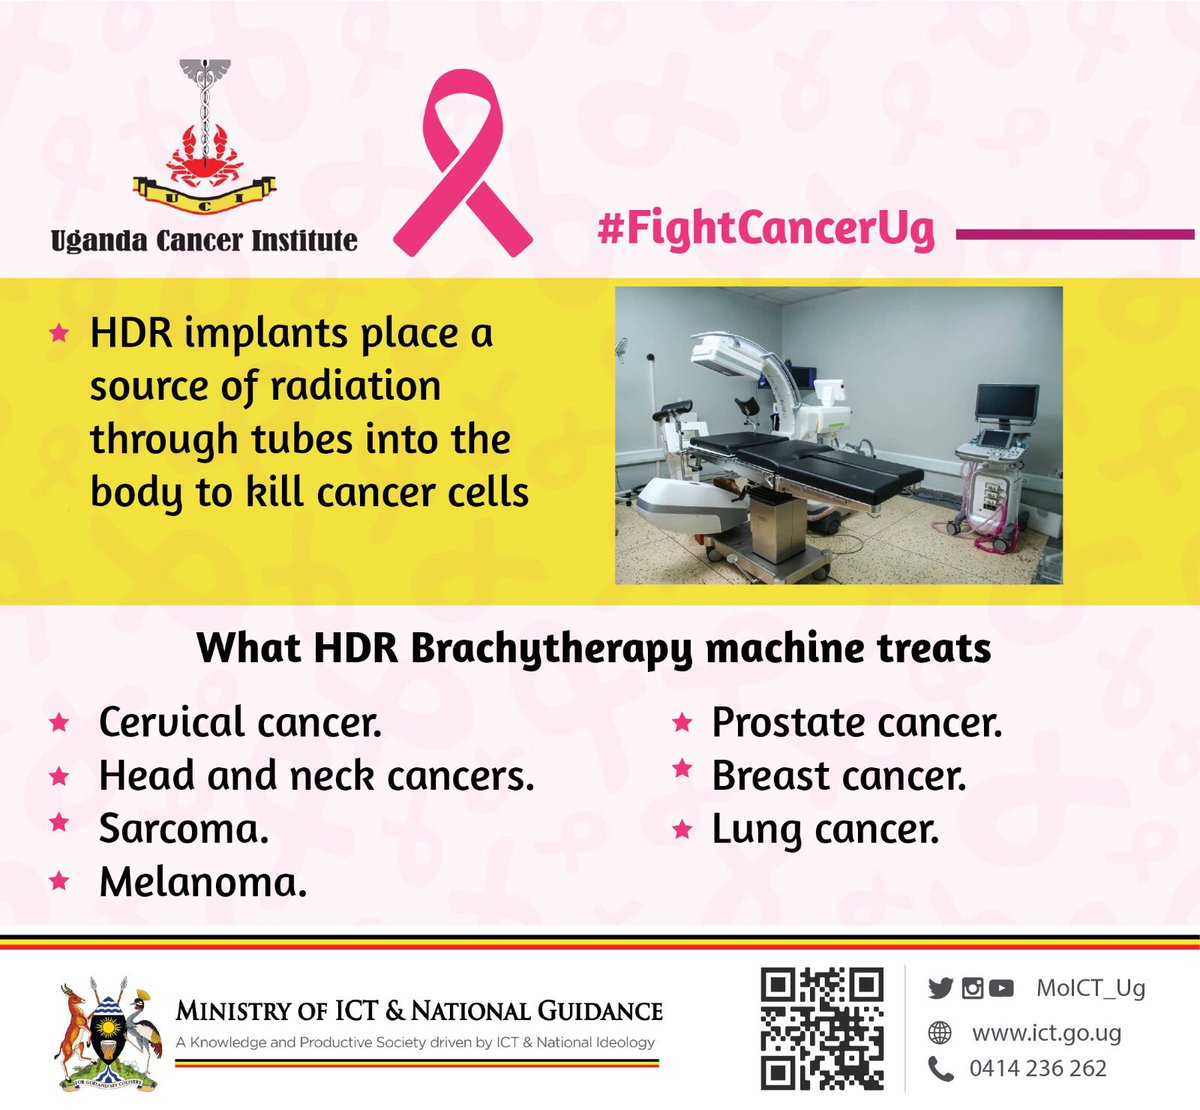 Cancer is among the deadly diseases in the world & appears in mysterious situations. 
Appears in various kinds even though the pain seems to be severe at all levels which causes prolonged suffering or even death.
#FightCancerUg @MoICT_Ug @UgandaCancerIns @DMU_Uganda @MosesWatasa